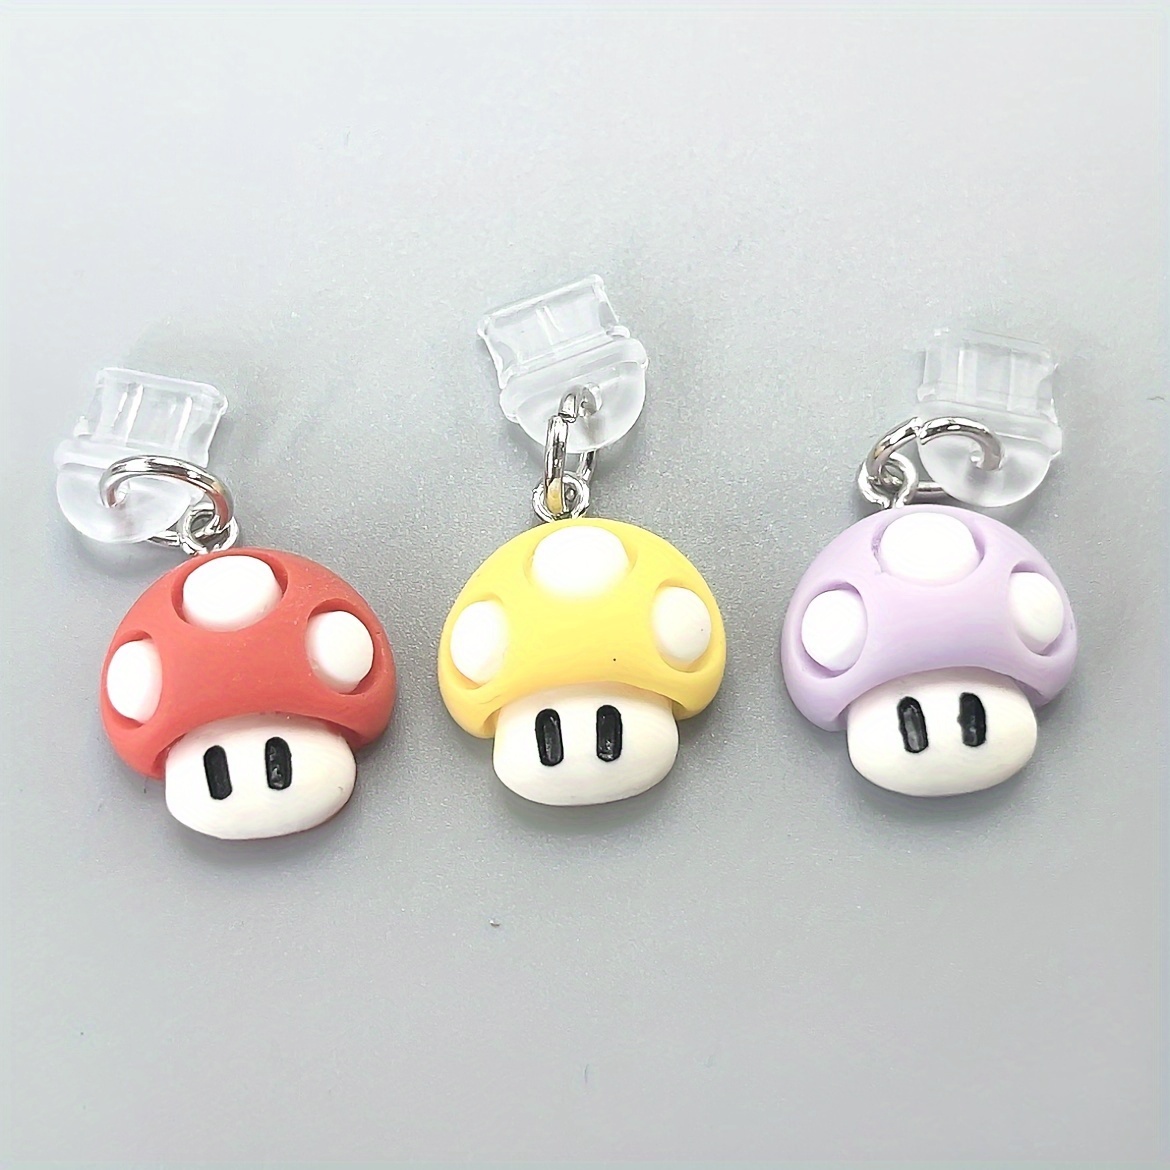 

Diy Colorful Cartoon Mushroom Charm For Phone Ports - Protect Your Device With A Whimsical Touch